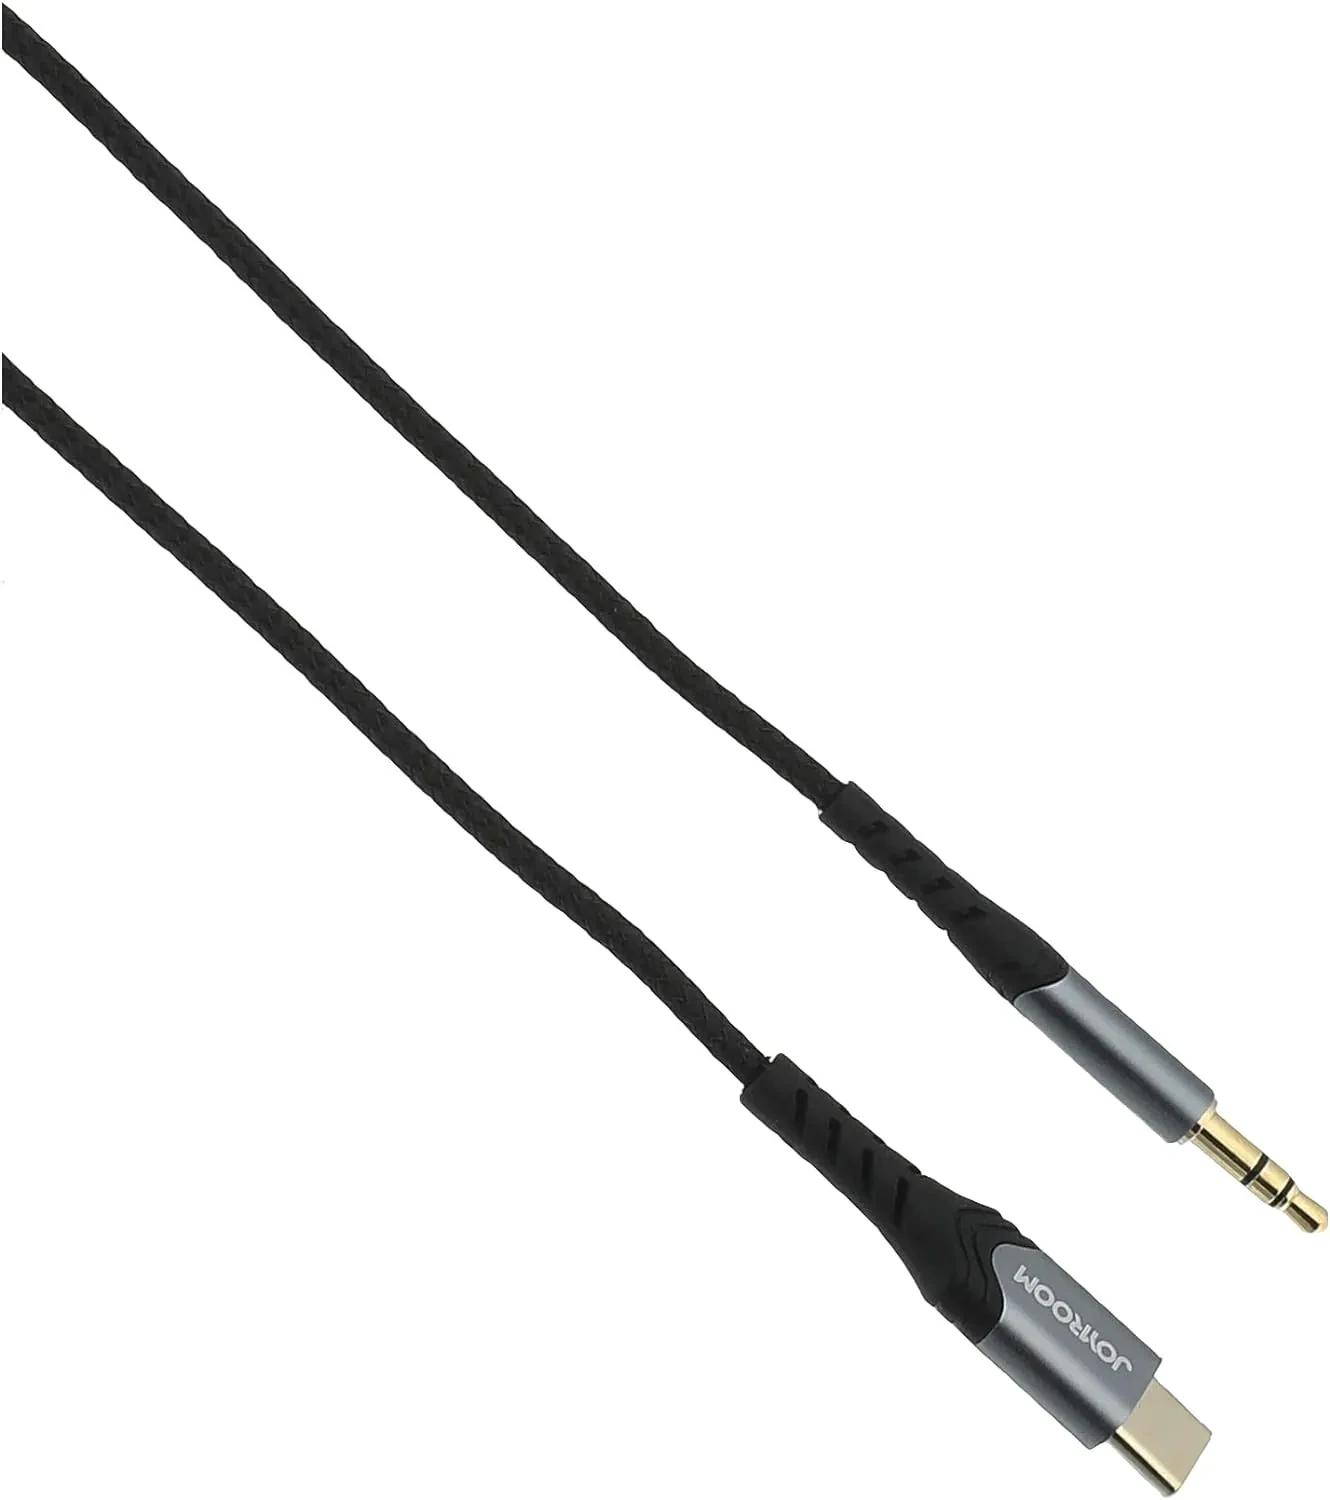 Joyroom SY-A03 Type-C To3.5mm Port Audio Cable 2M – Black Color